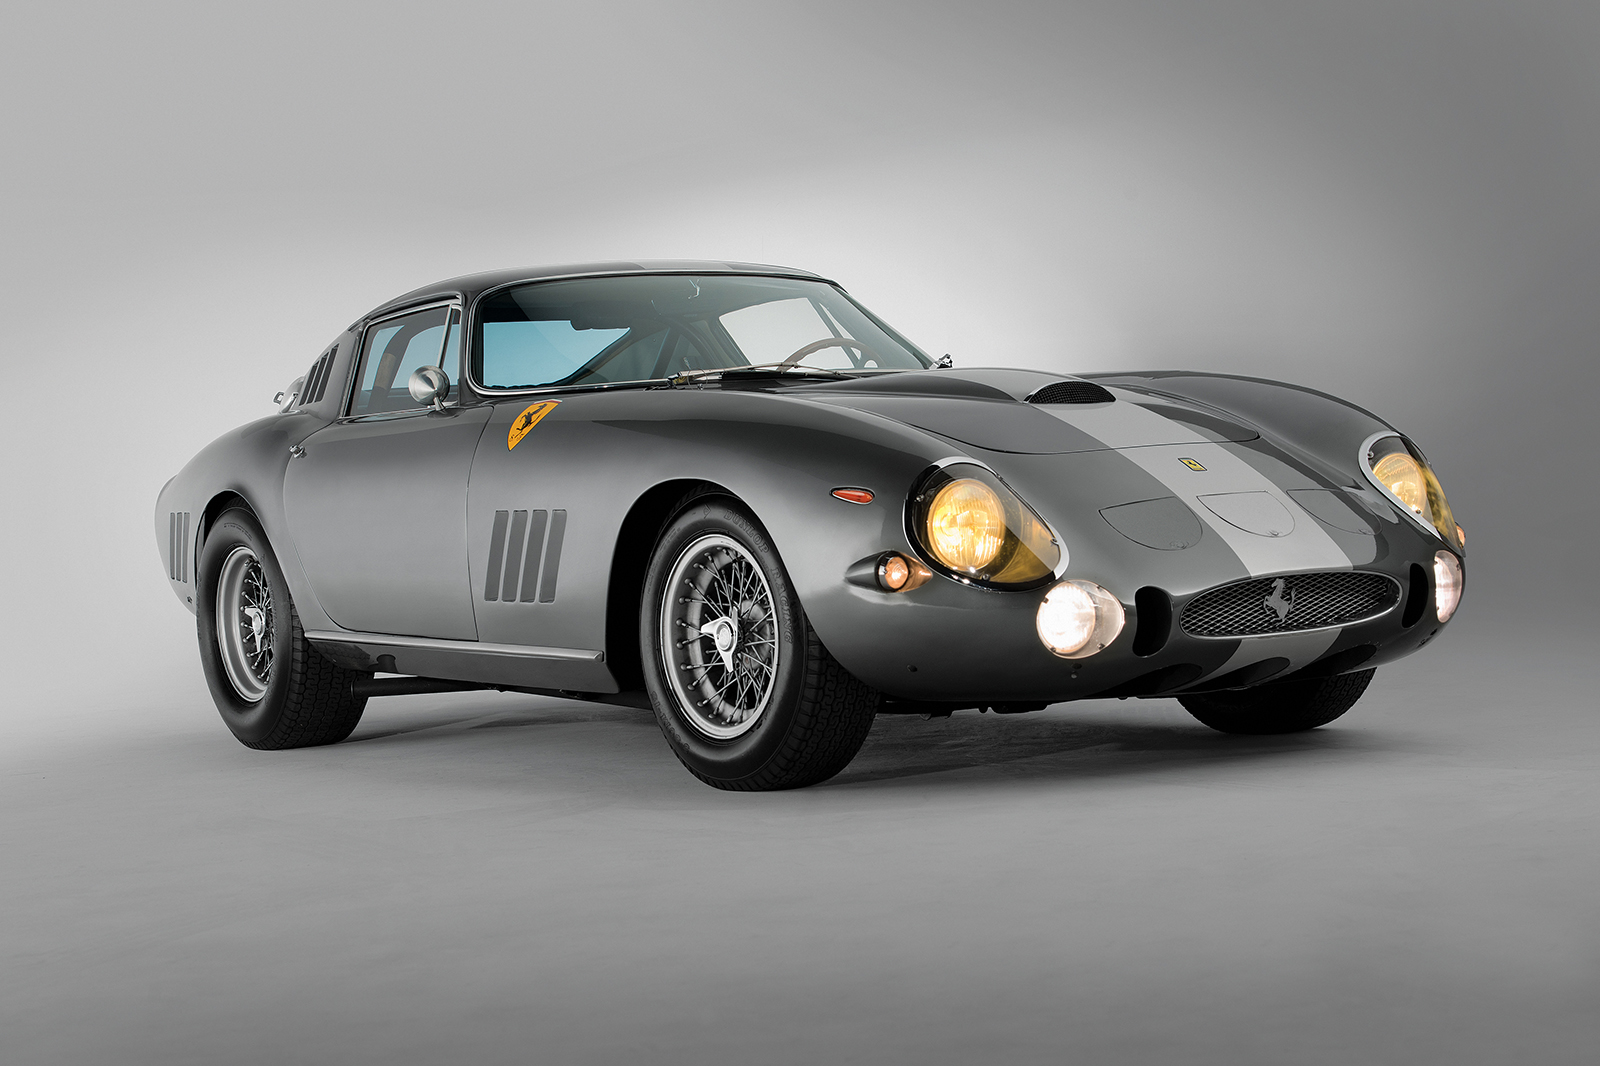 What are the most expensive cars ever?